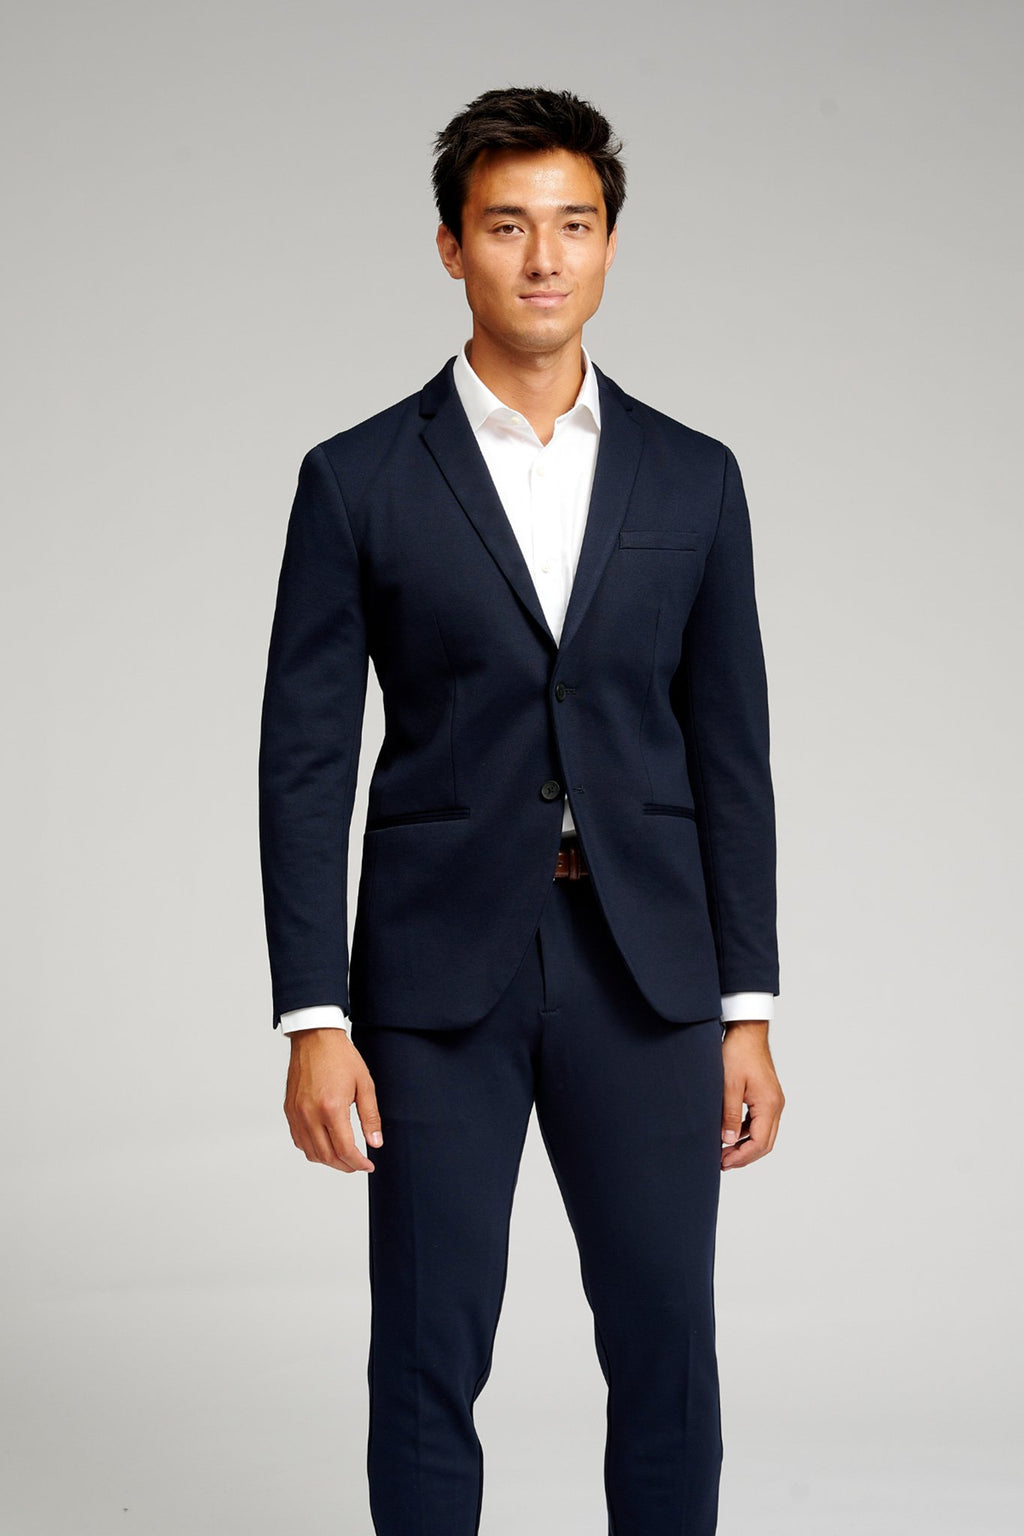 The Original Performance Suit™️ (Navy) + Shirt & Tie - Package Deal